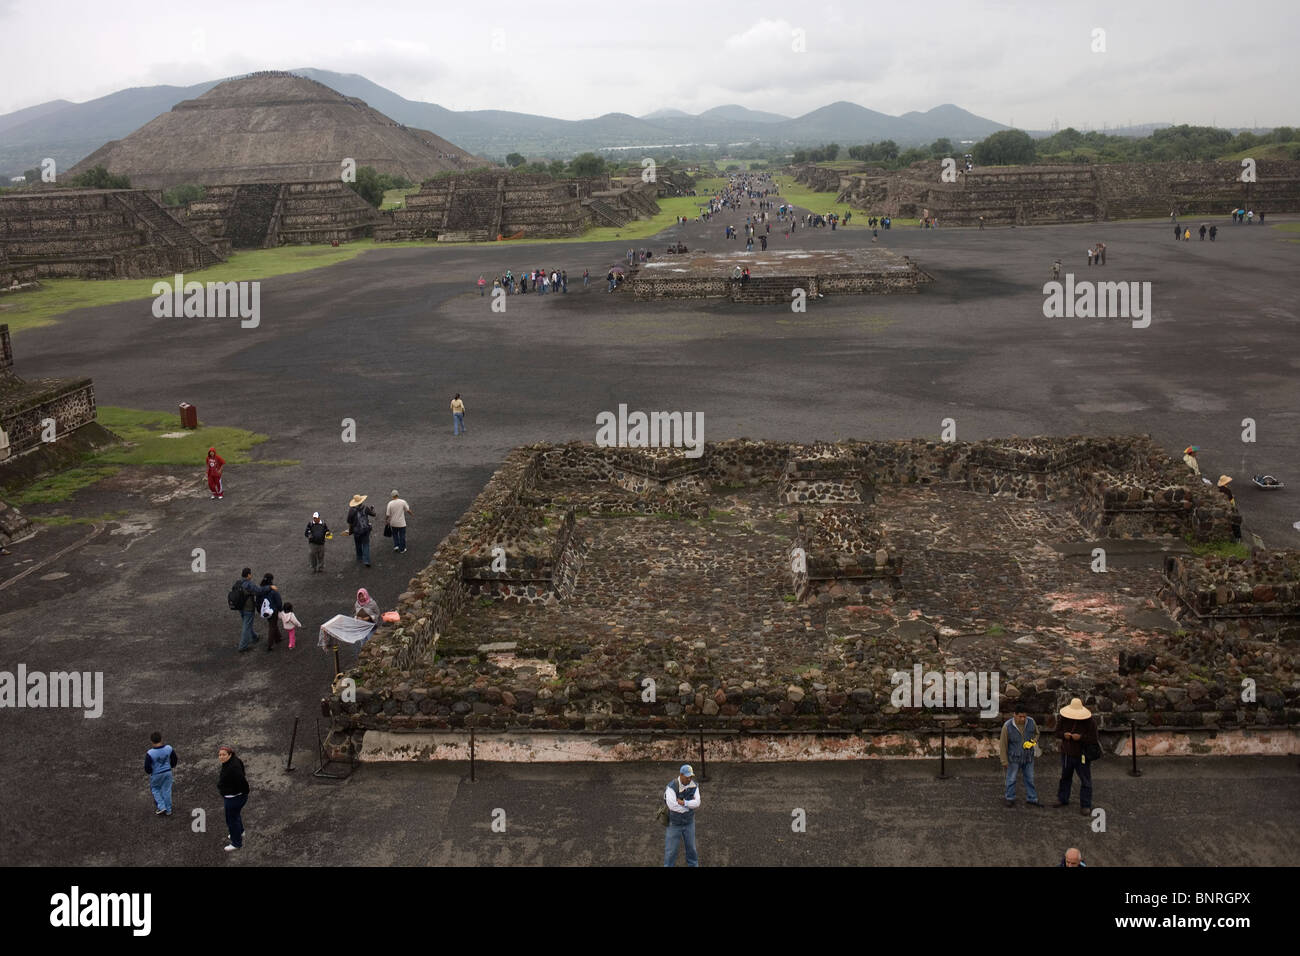 Tourists visit the ancient Toltec city of Teotihuacan, Mexico City, July 26, 2010. Stock Photo